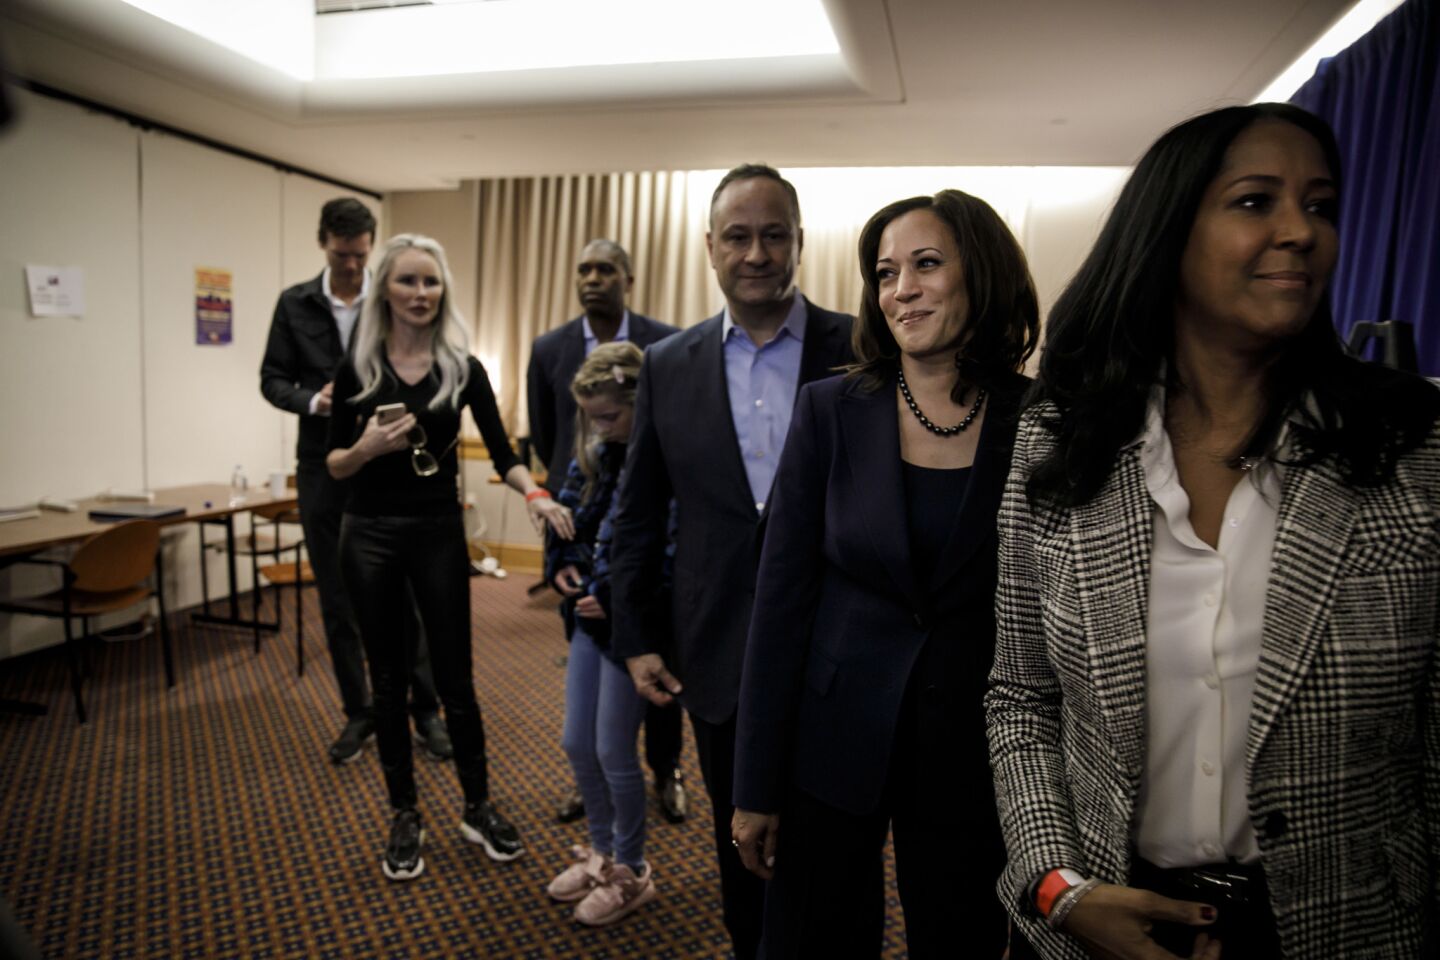 Kamala Harris waits backstage before making her appearance at the Oakland rally.